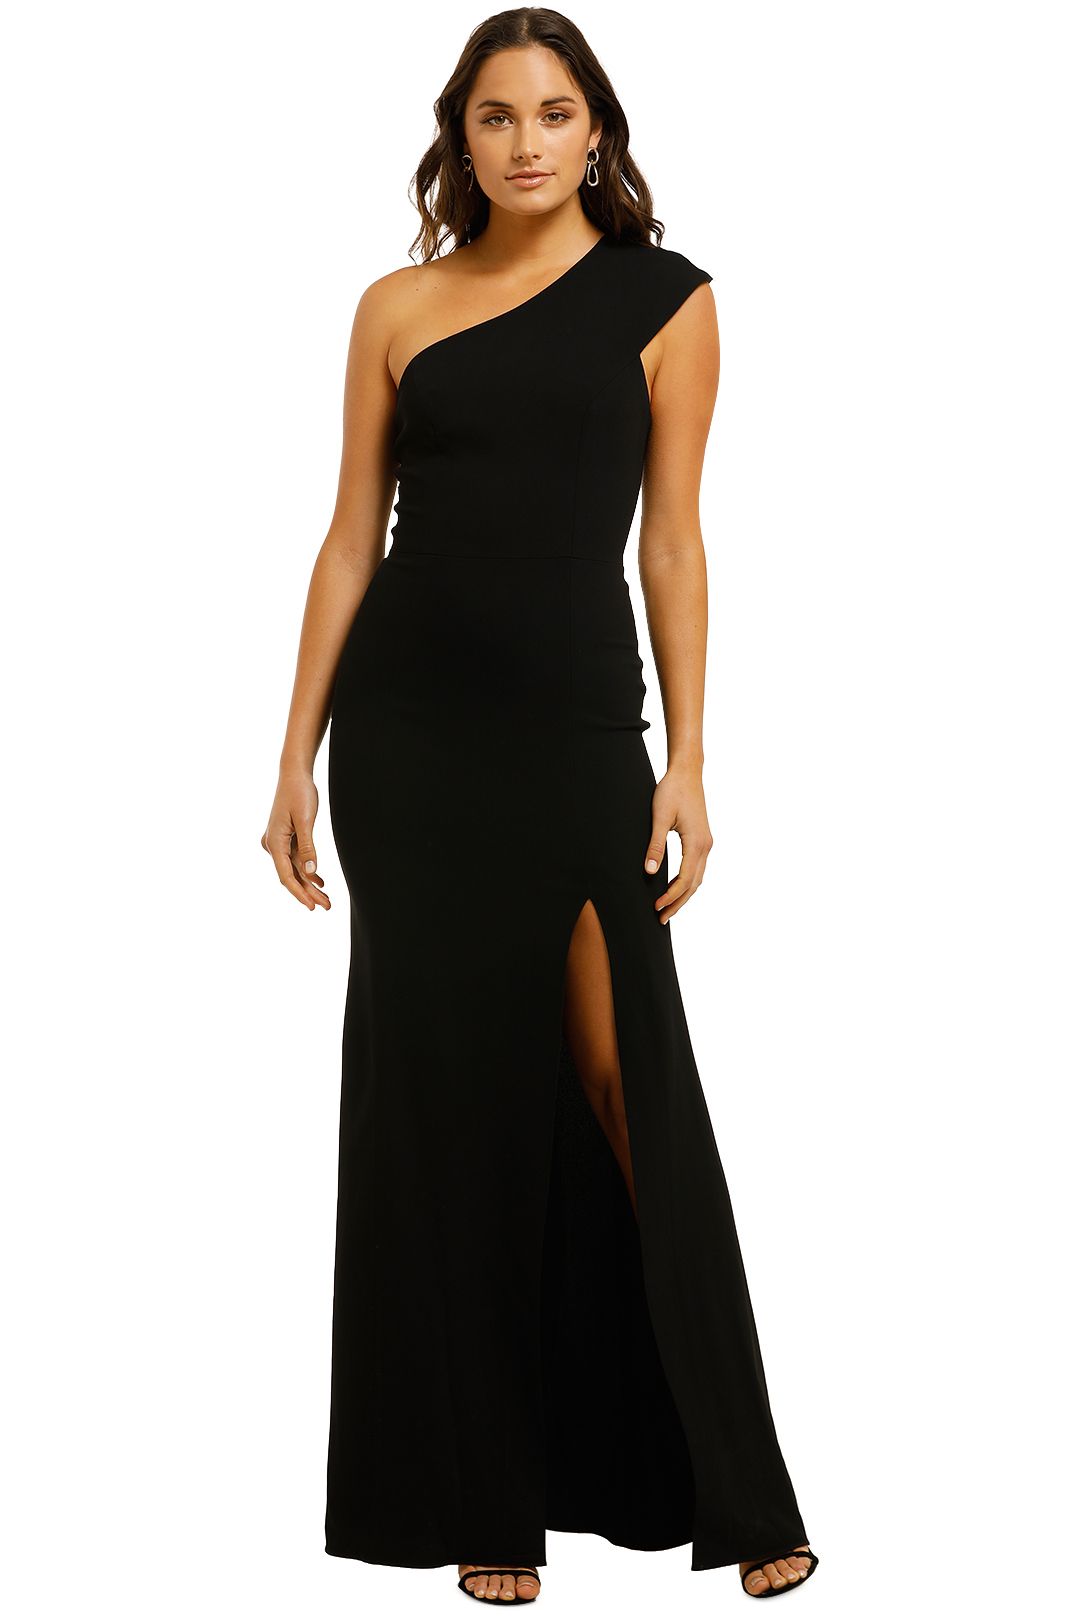 Ginger and Smart - Elixer Gown - Black